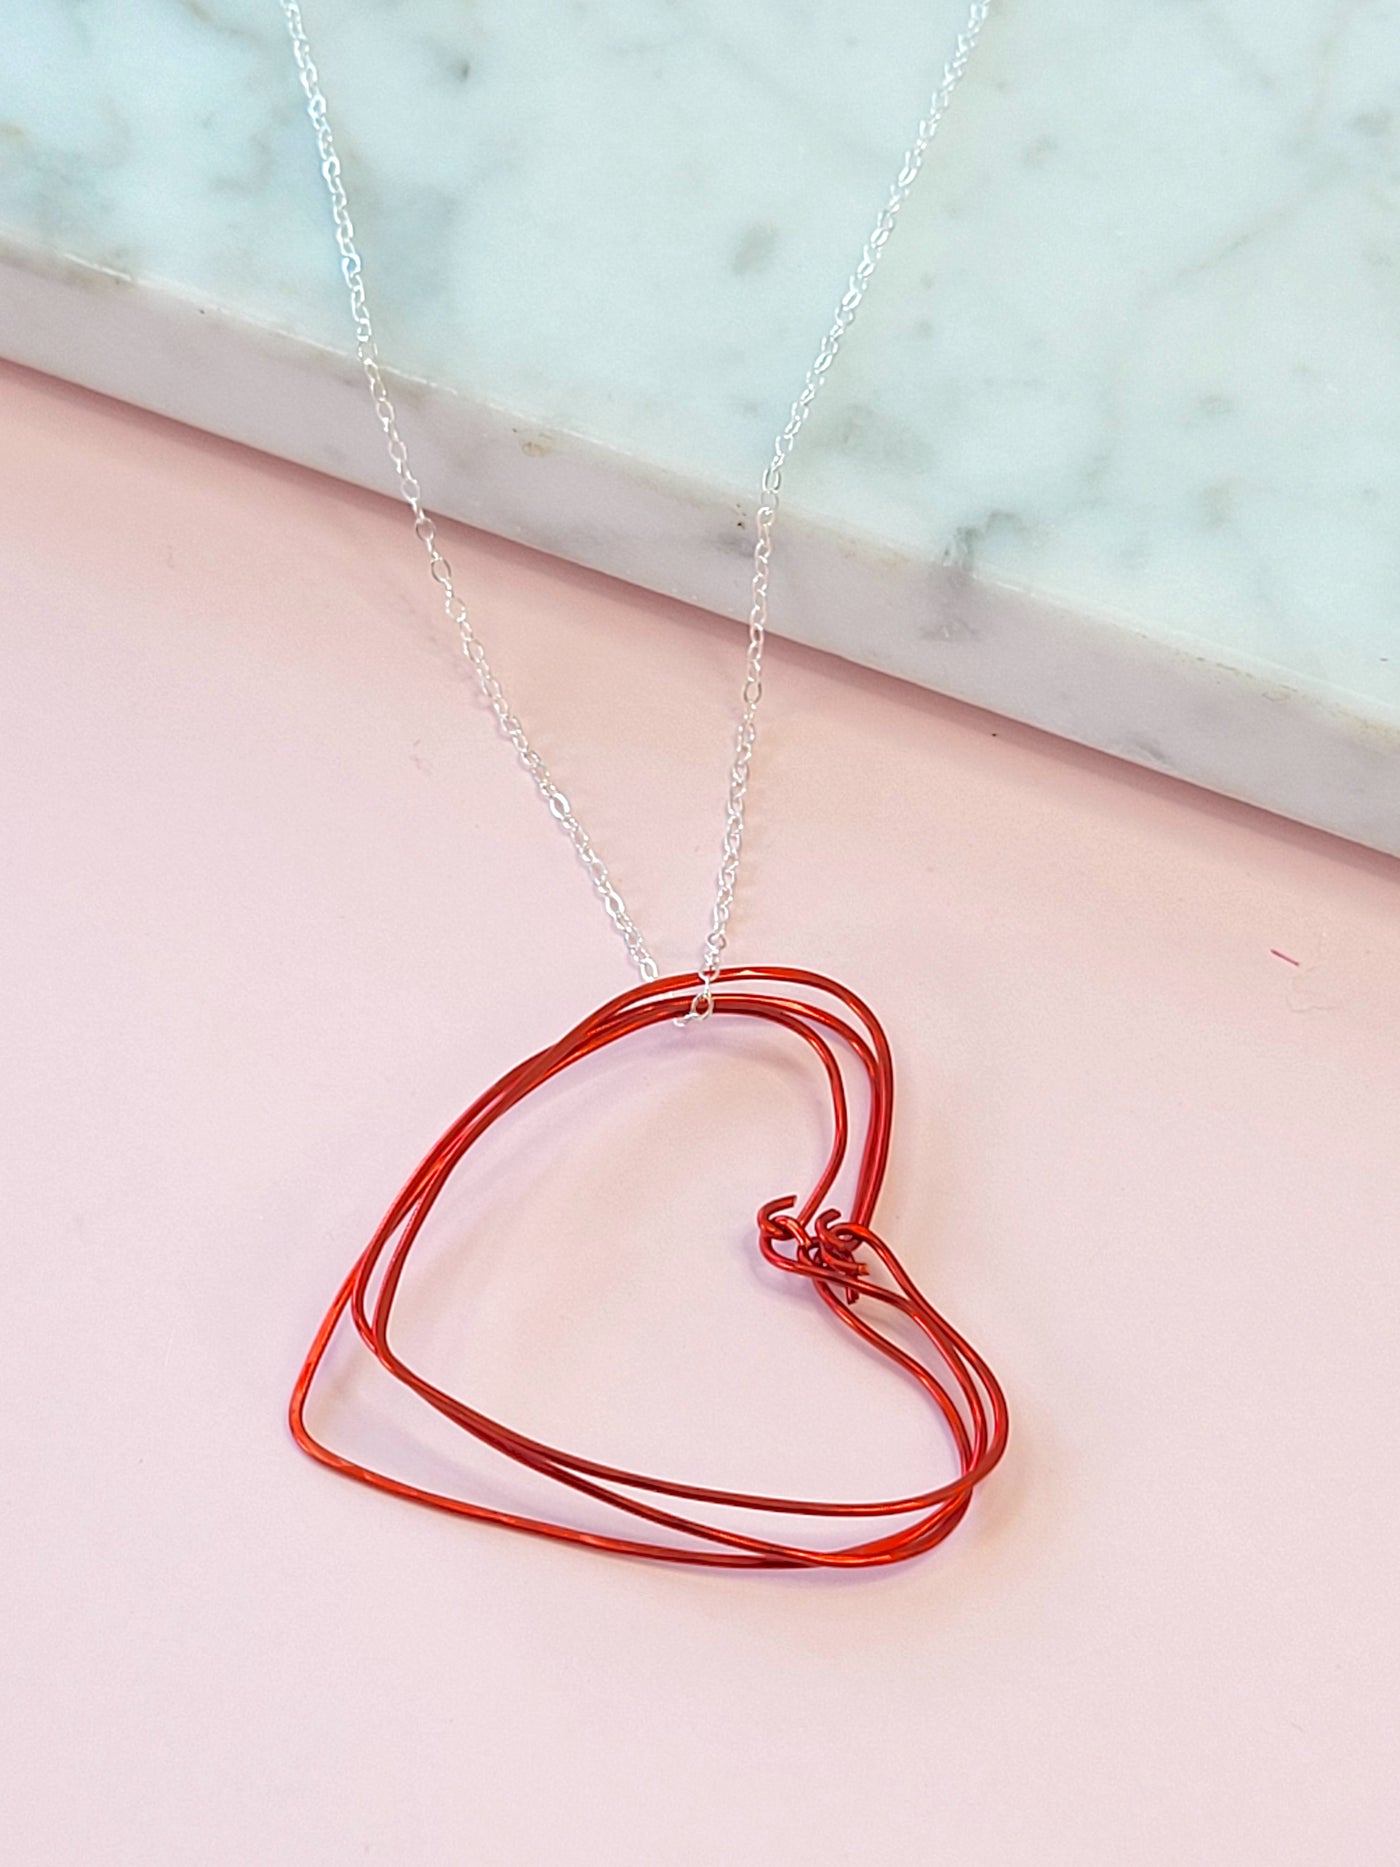 Red Hearts Necklace on a Silver Chain